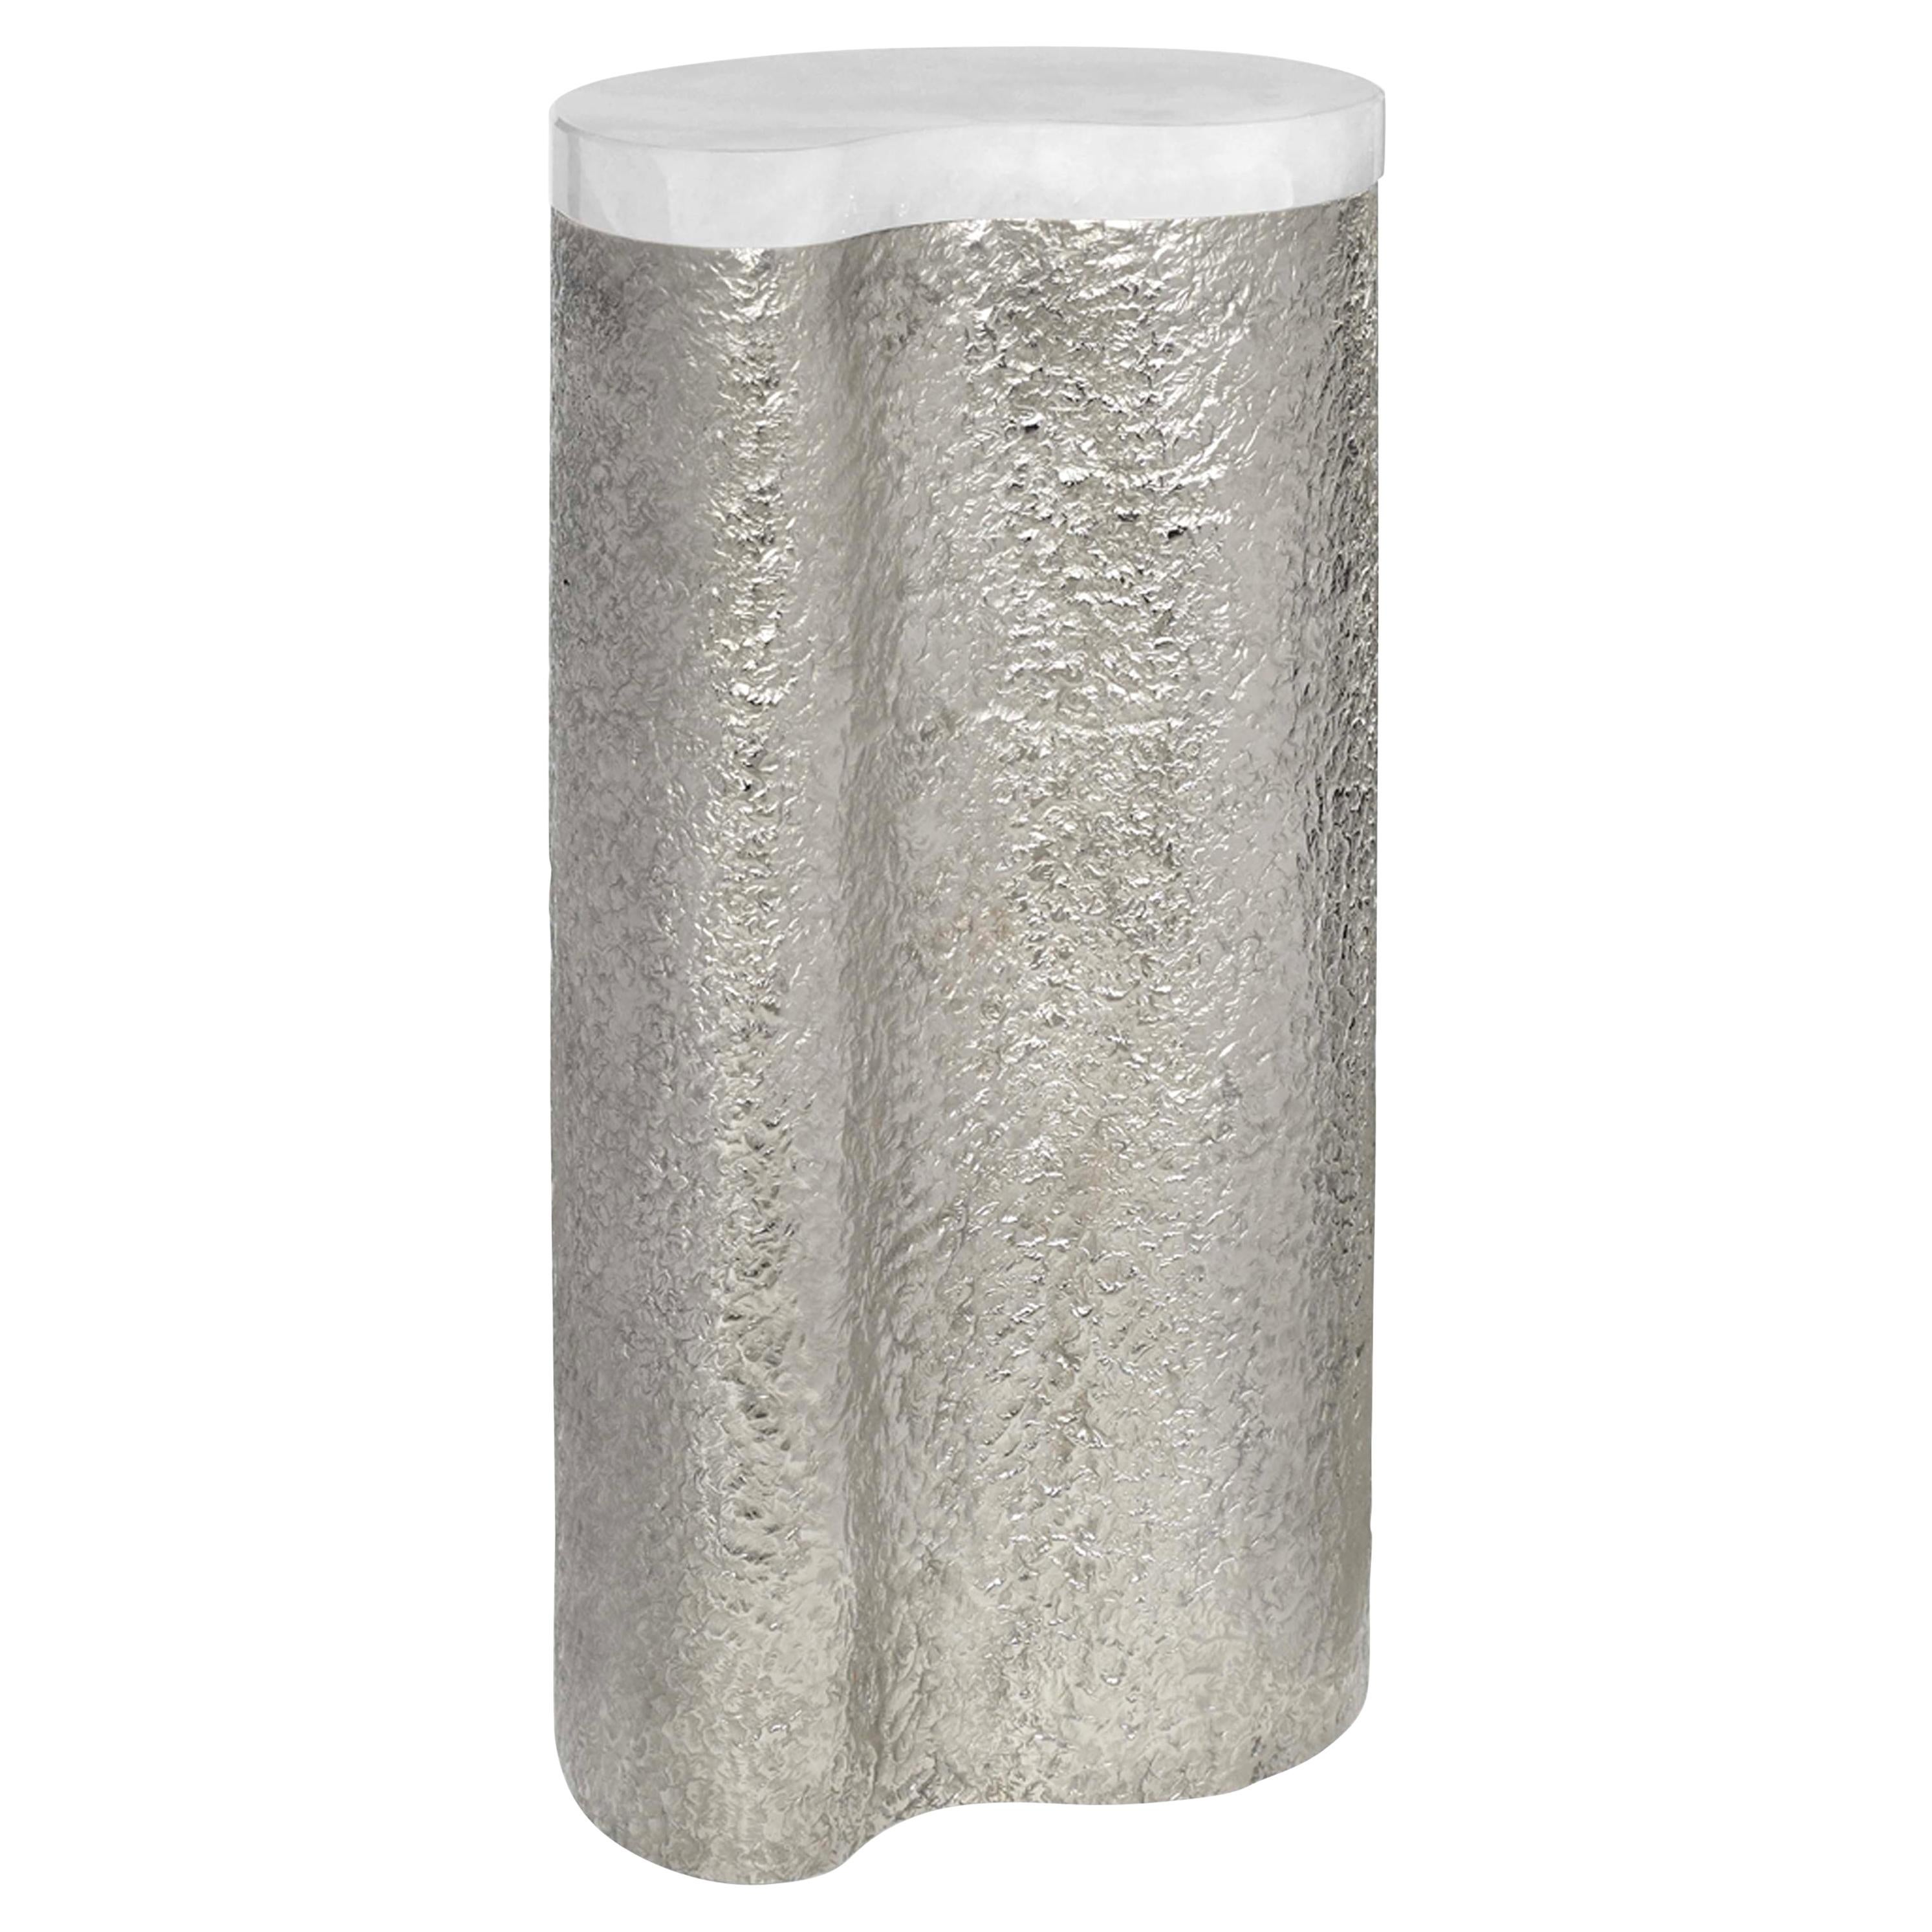 CLO I Rock Crystal Side Table by Phoenix